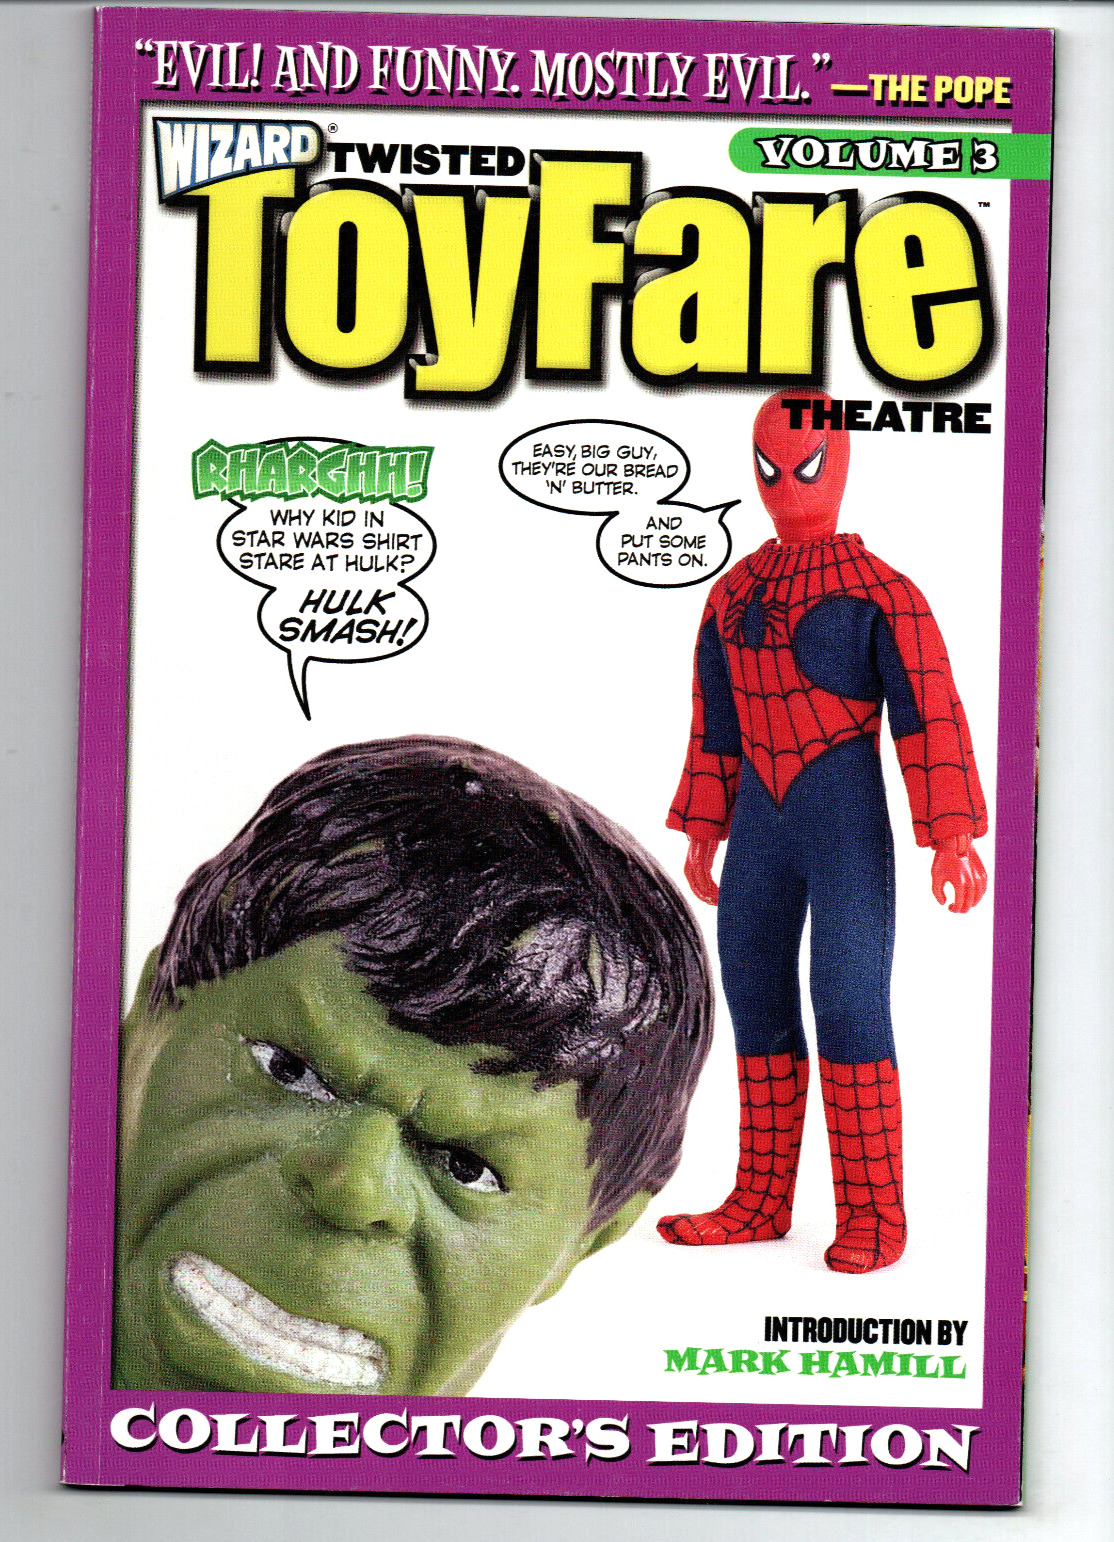 Twisted Toyfare Theatre #3 - Collector's Edition - Wizard - 2003 - NM